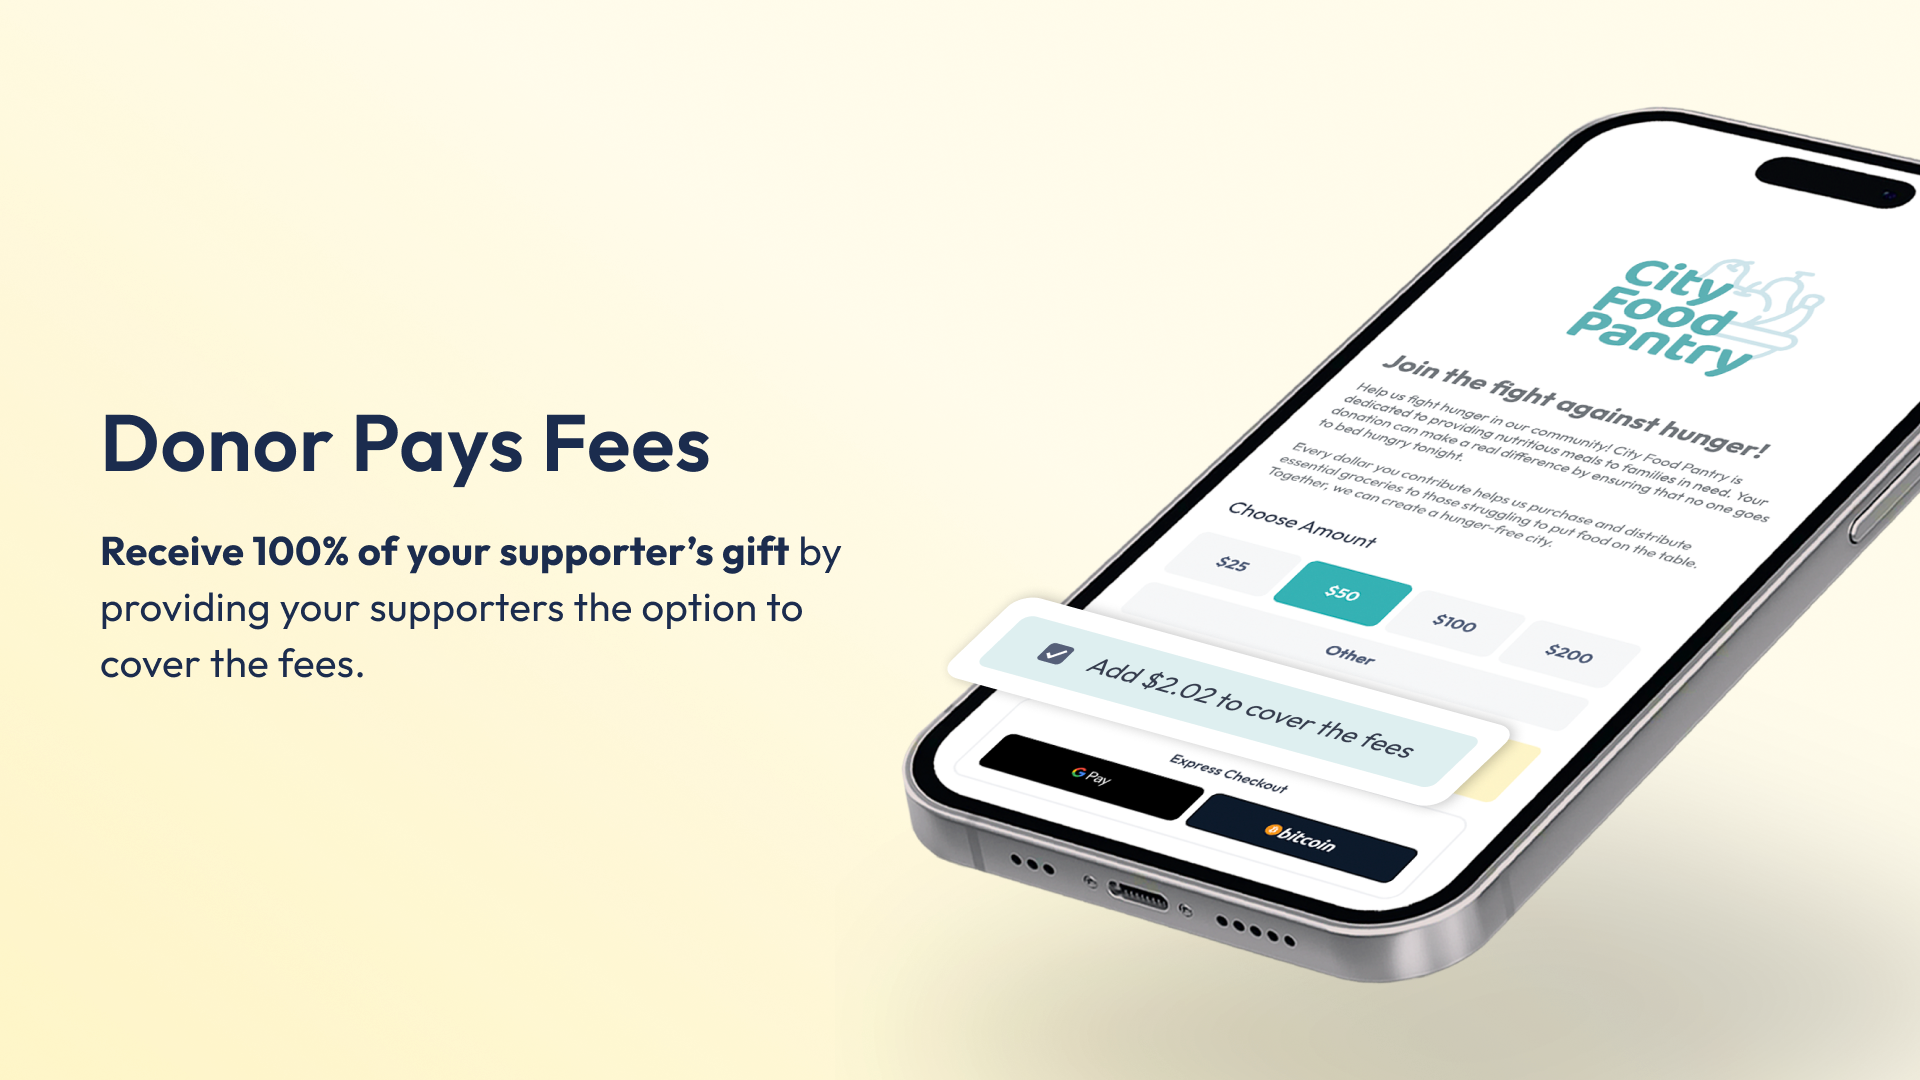 Receive 100% of your supporter’s gift by providing your supporters the option to cover the fees.